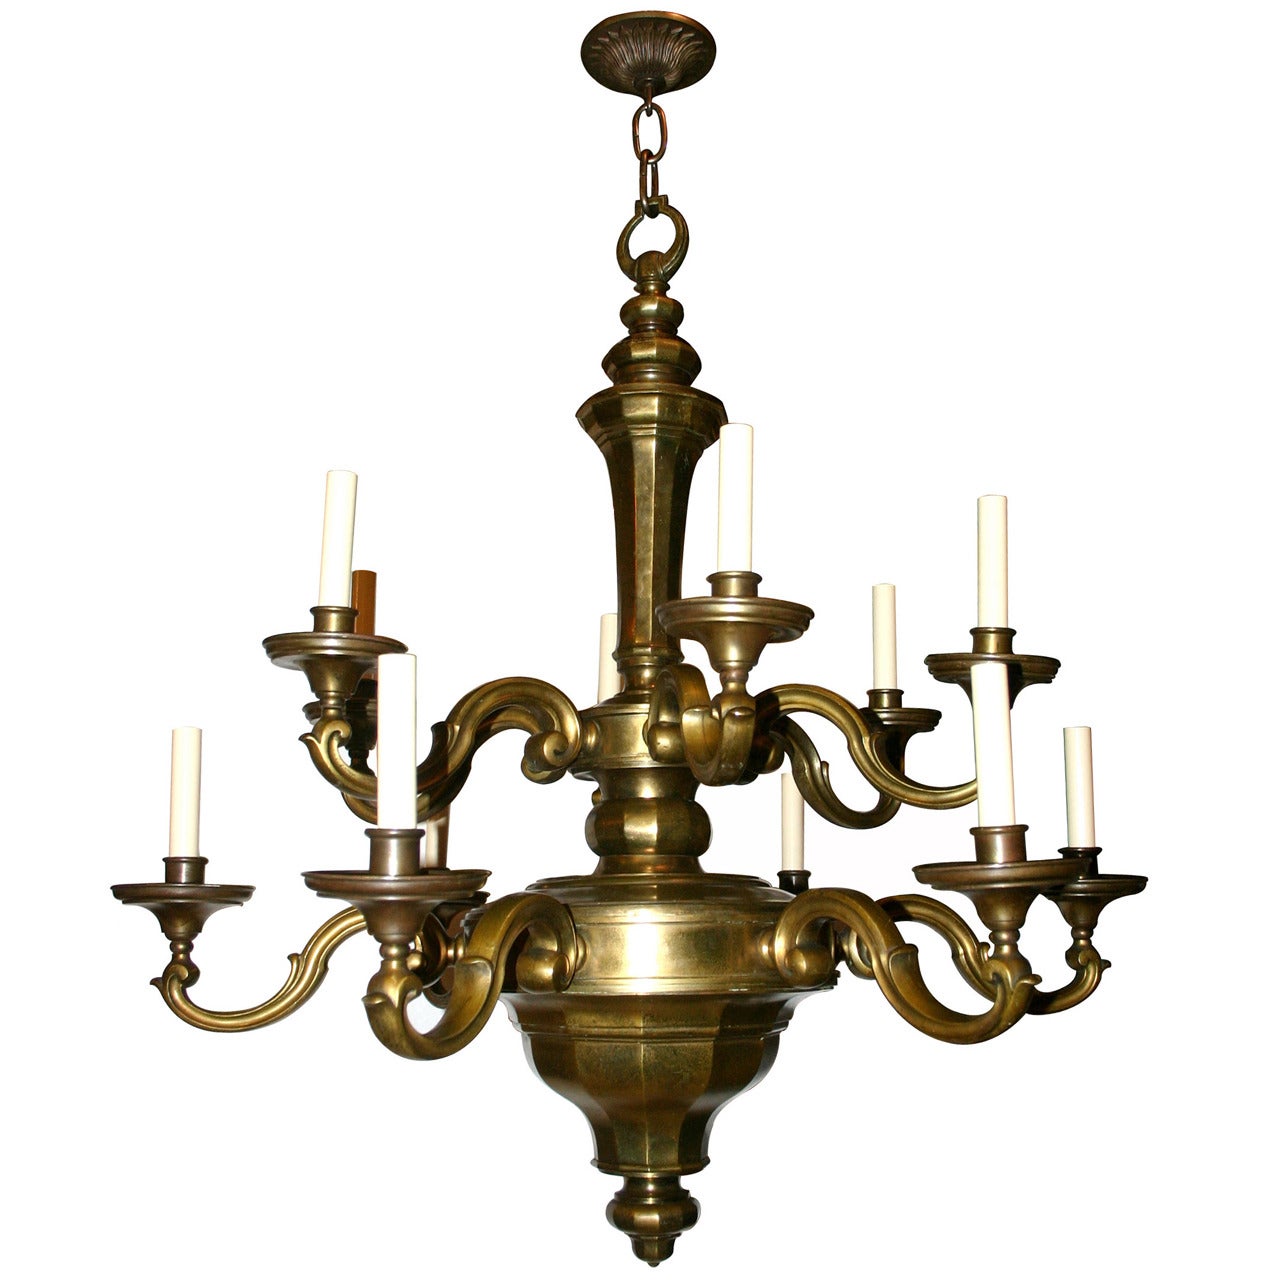 Dutch Double-Tiered Chandelier For Sale